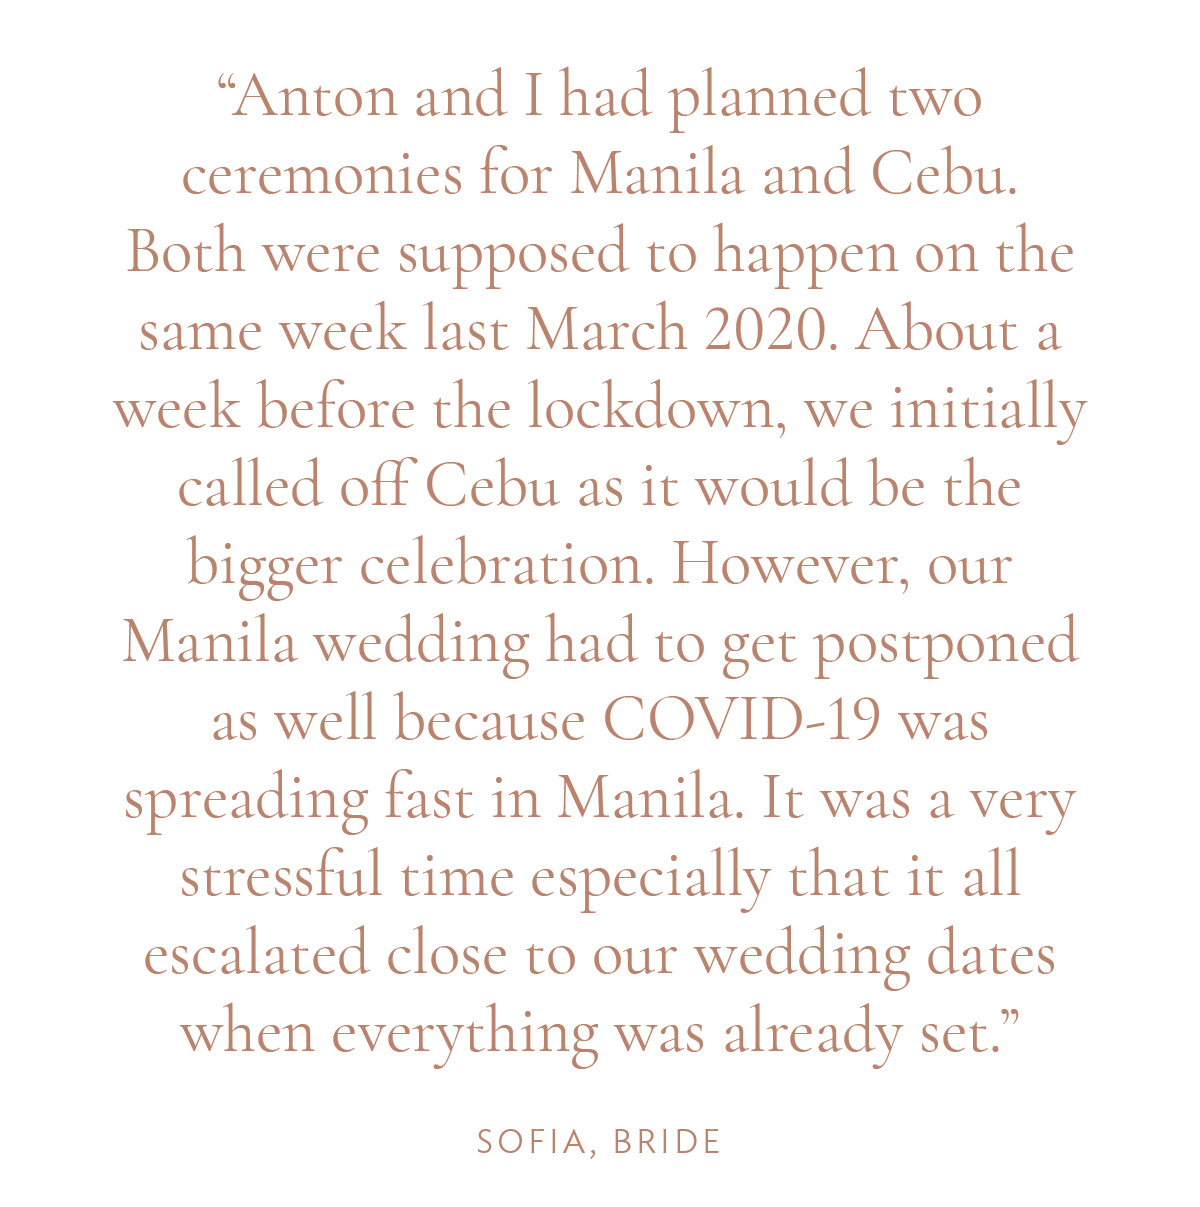 "Anton and I had planned two ceremonies for Manila and Cebu. Both were supposed to happen on the same week last March 2020. About a week before the lockdown, we initially called off Cebu as it would be the bigger celebration. However, our Manila wedding had to get postponed as well because COVID-19 was spreading fast in Manila. It was a very stressful time especially that it all escalated close to our wedding dates when everything was already set." -Sofia, Bride